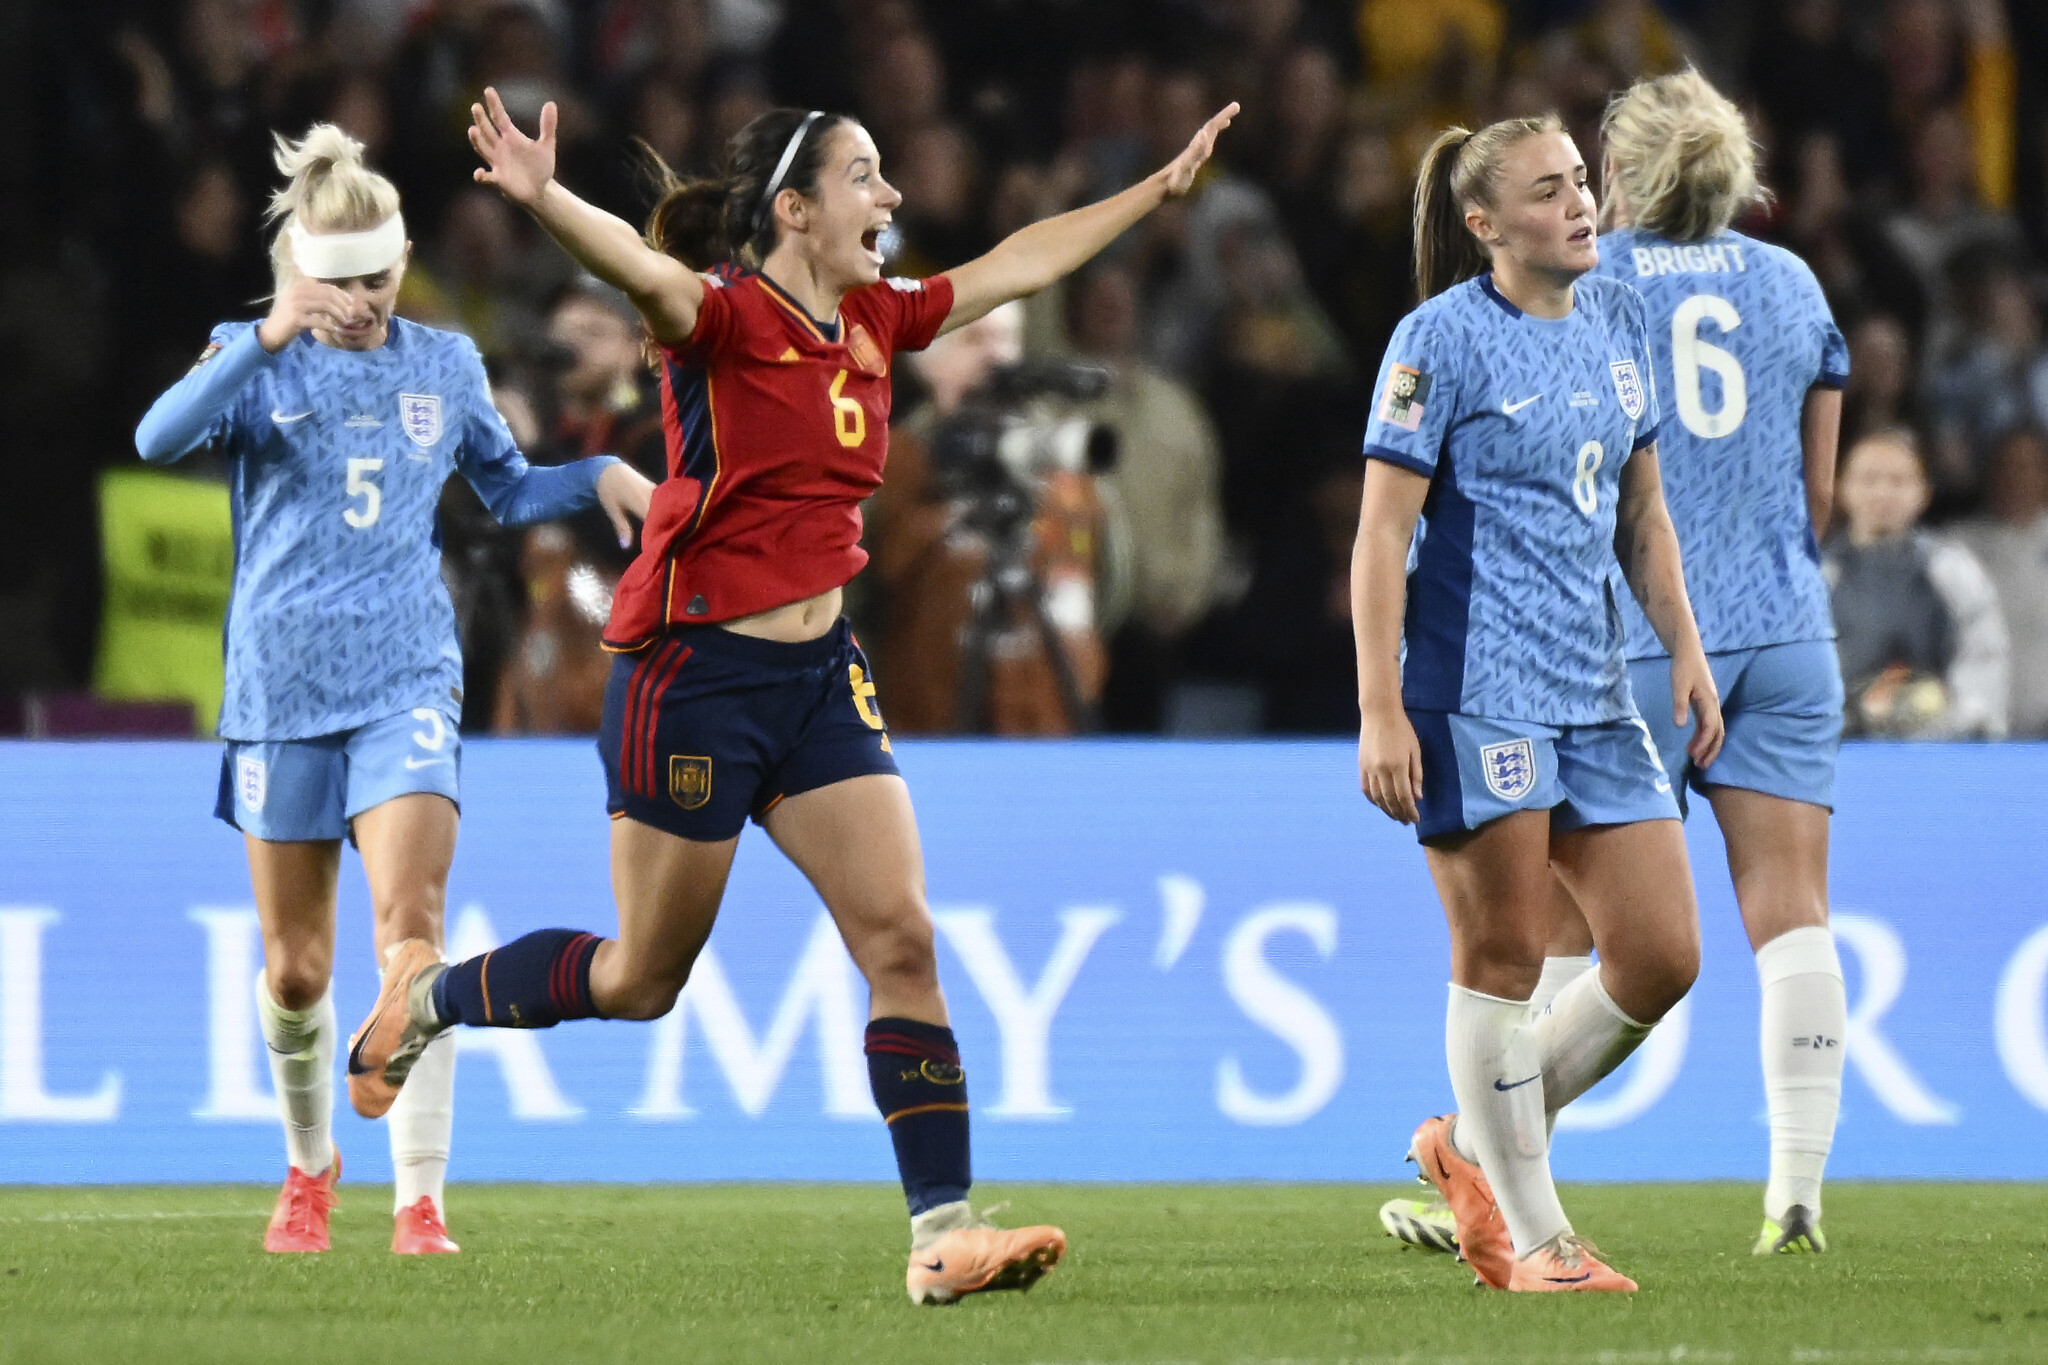 Spain beats England 1-0 to win its first Women's World Cup soccer title